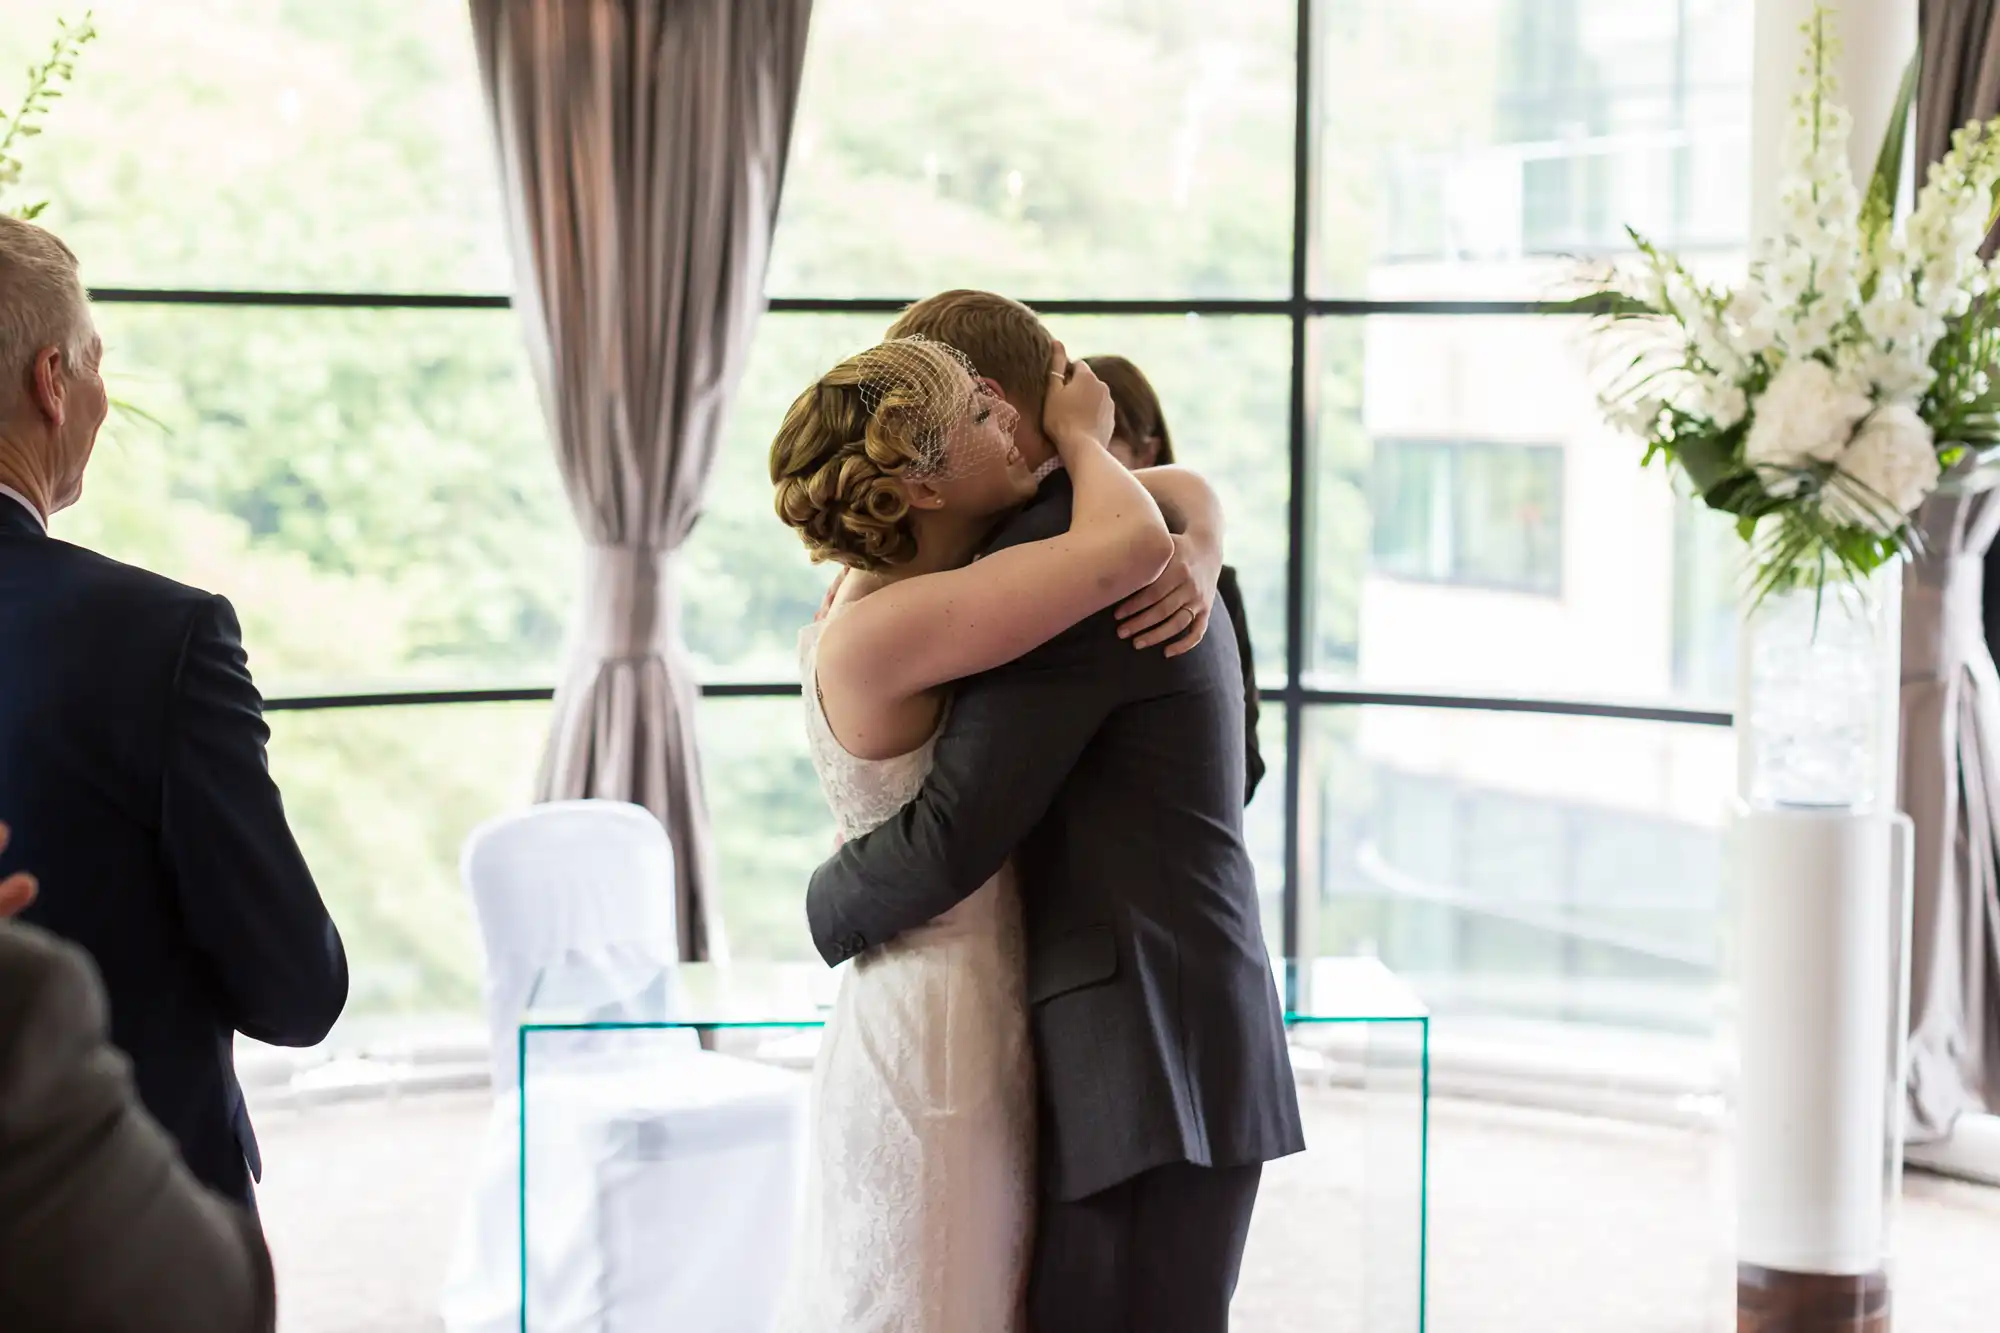 A bride and groom embrace lovingly at their wedding ceremony indoors, with large windows and elegant floral decorations in the background.